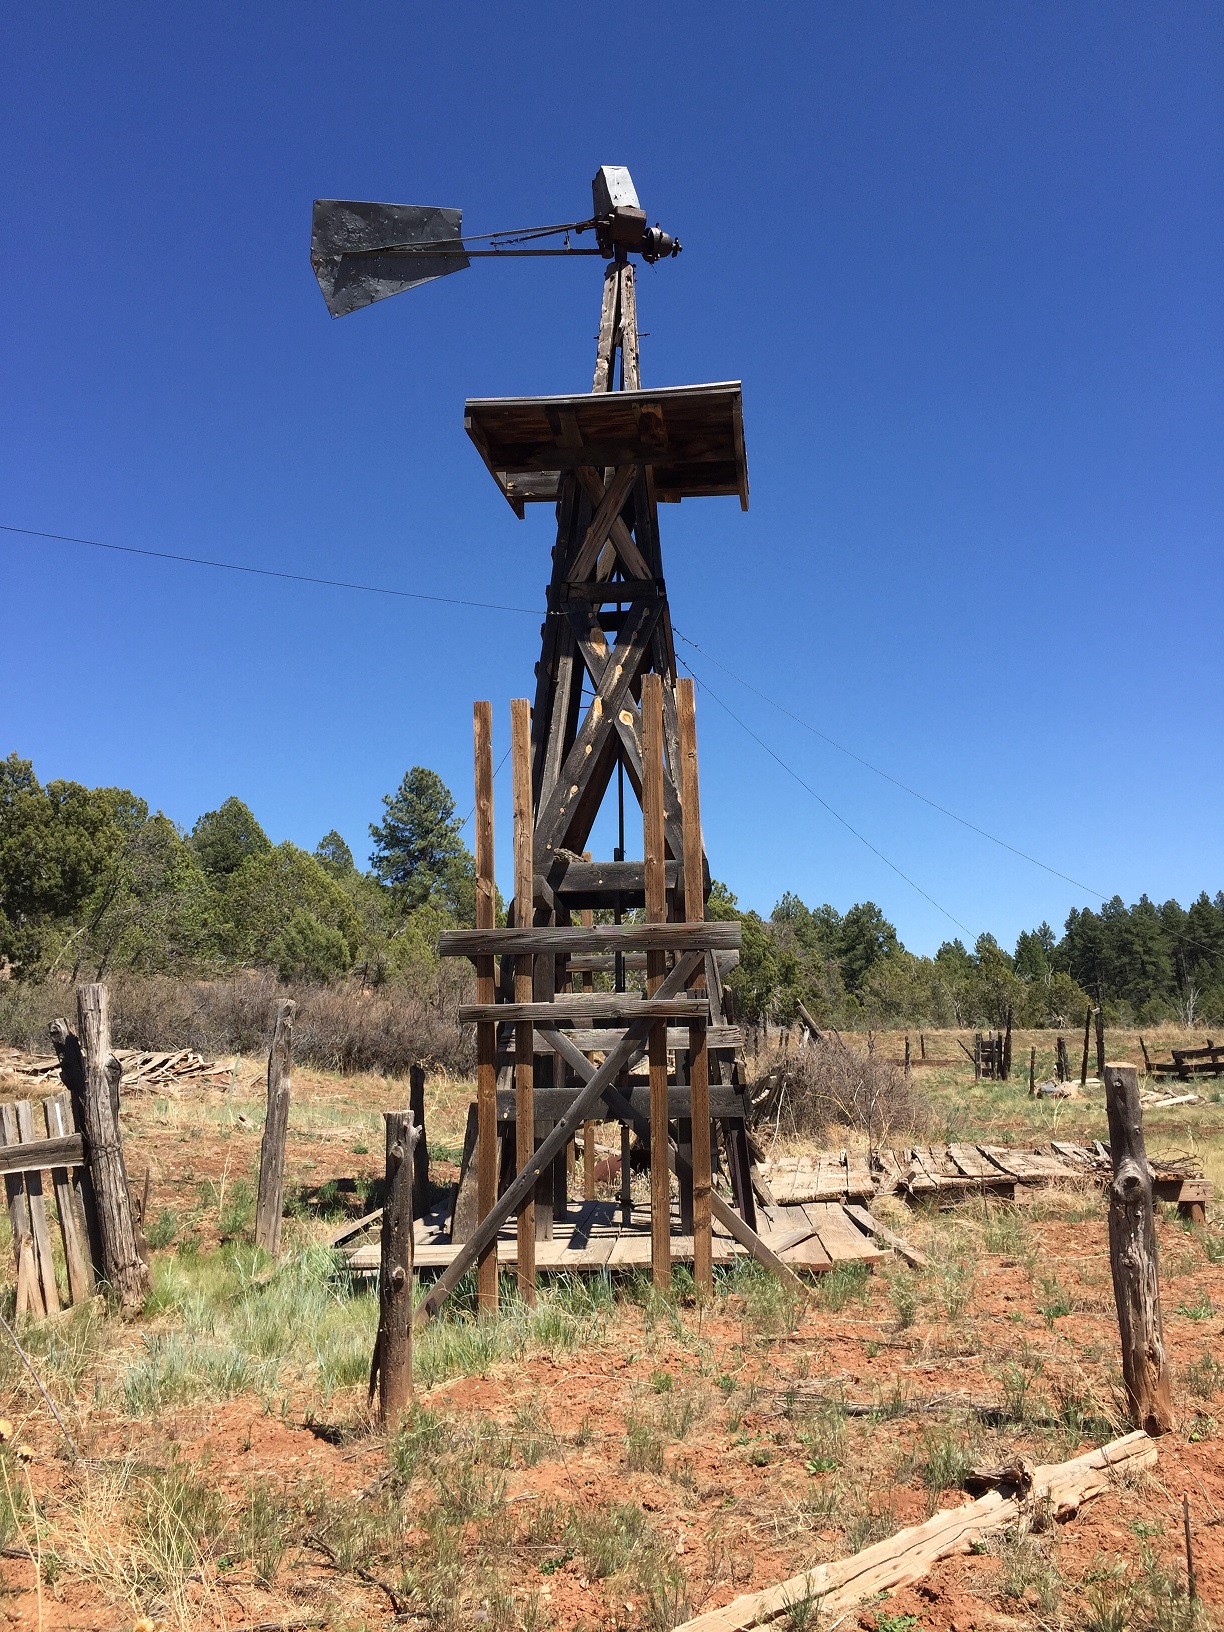 A windmill at the Pine Cabin on the Arizona Strip